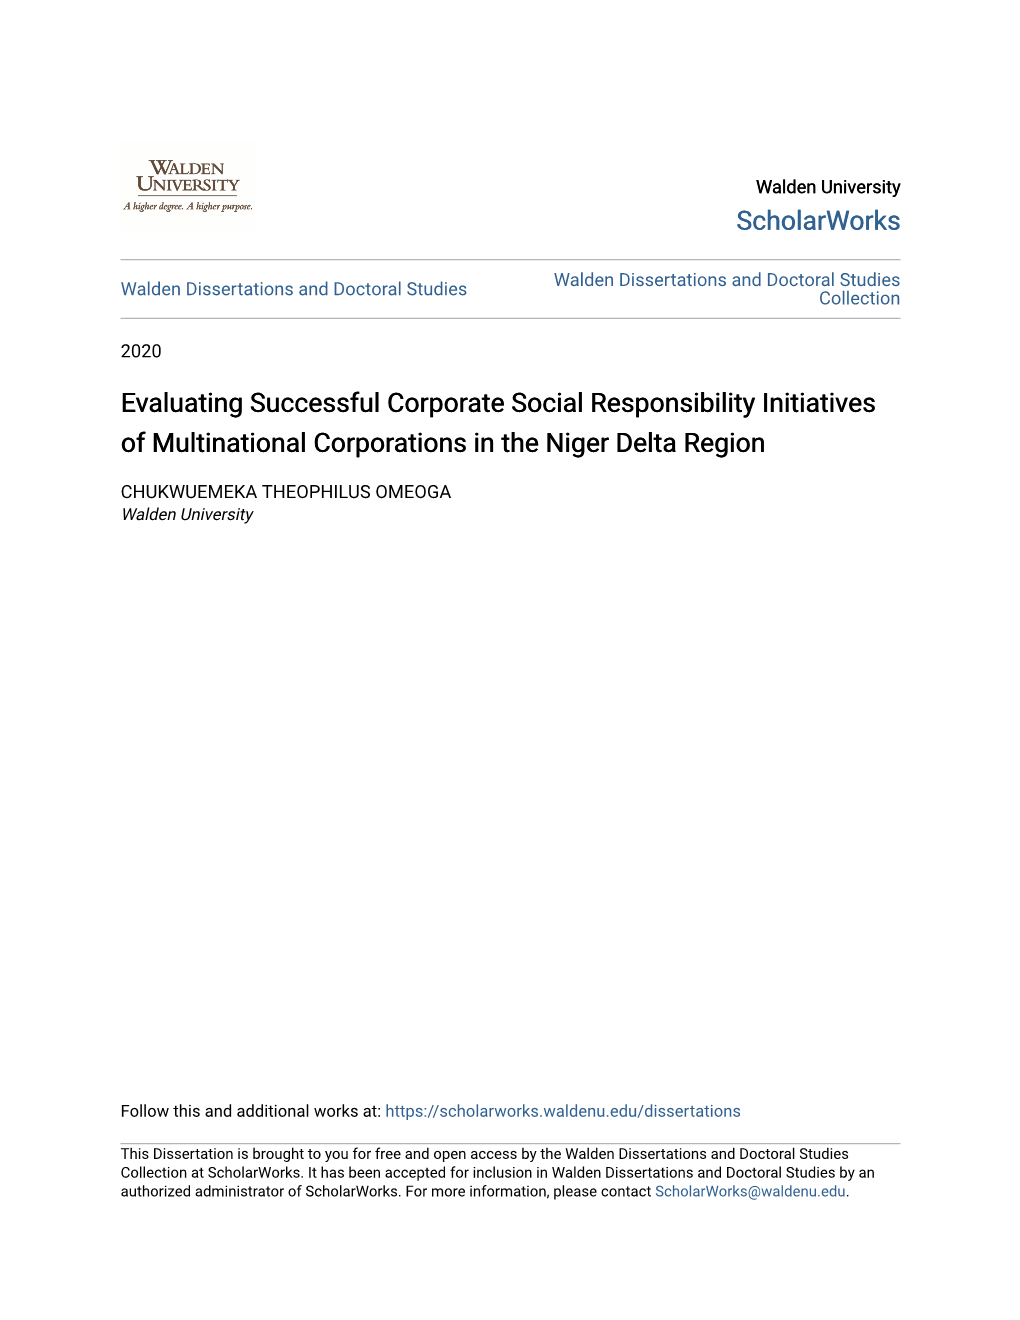 Evaluating Successful Corporate Social Responsibility Initiatives of Multinational Corporations in the Niger Delta Region